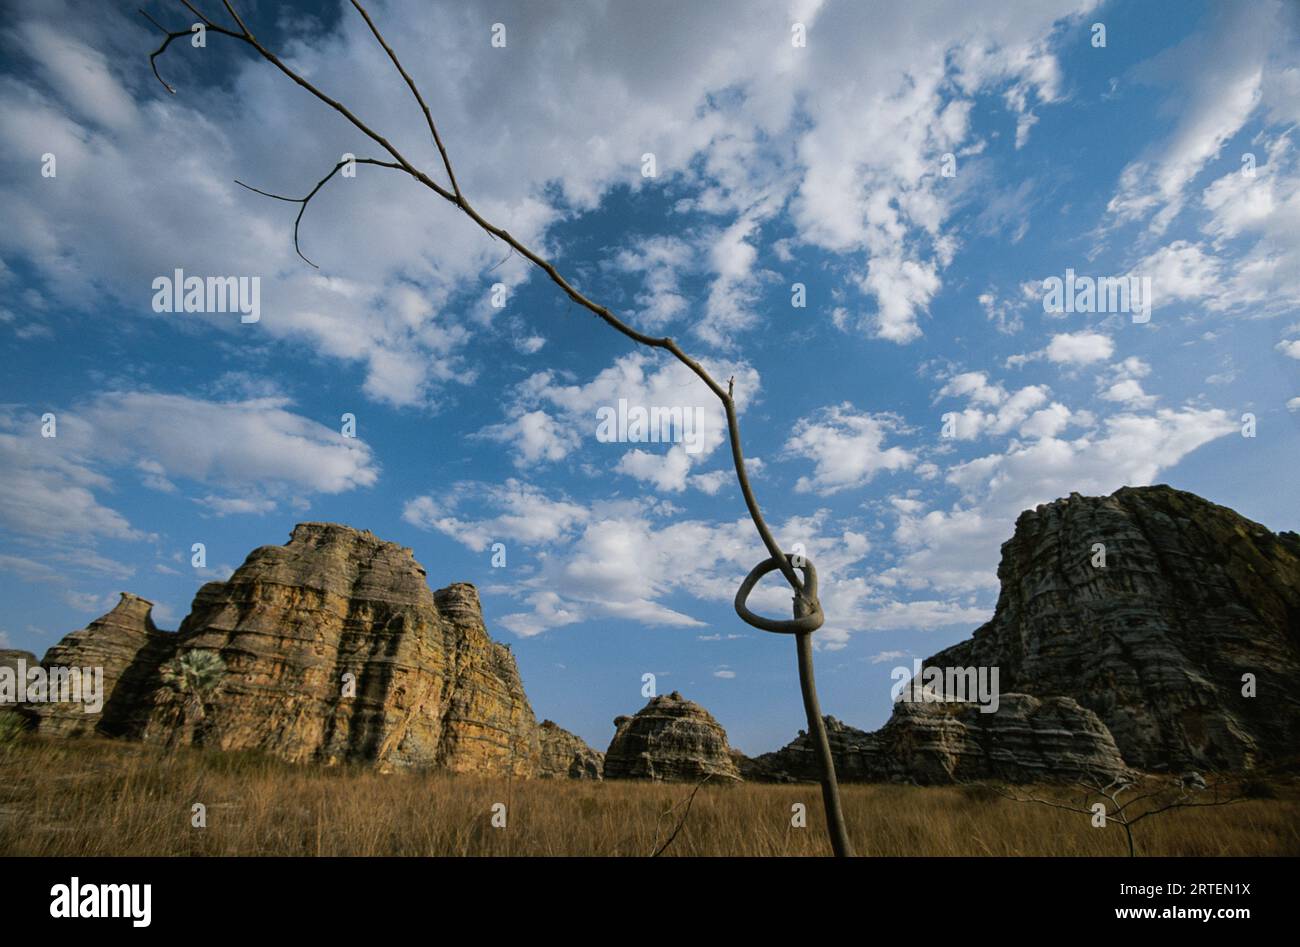 Knotted branch grows in front of a vast sky and rock formations; Republic of Madagascar, Africa Stock Photo